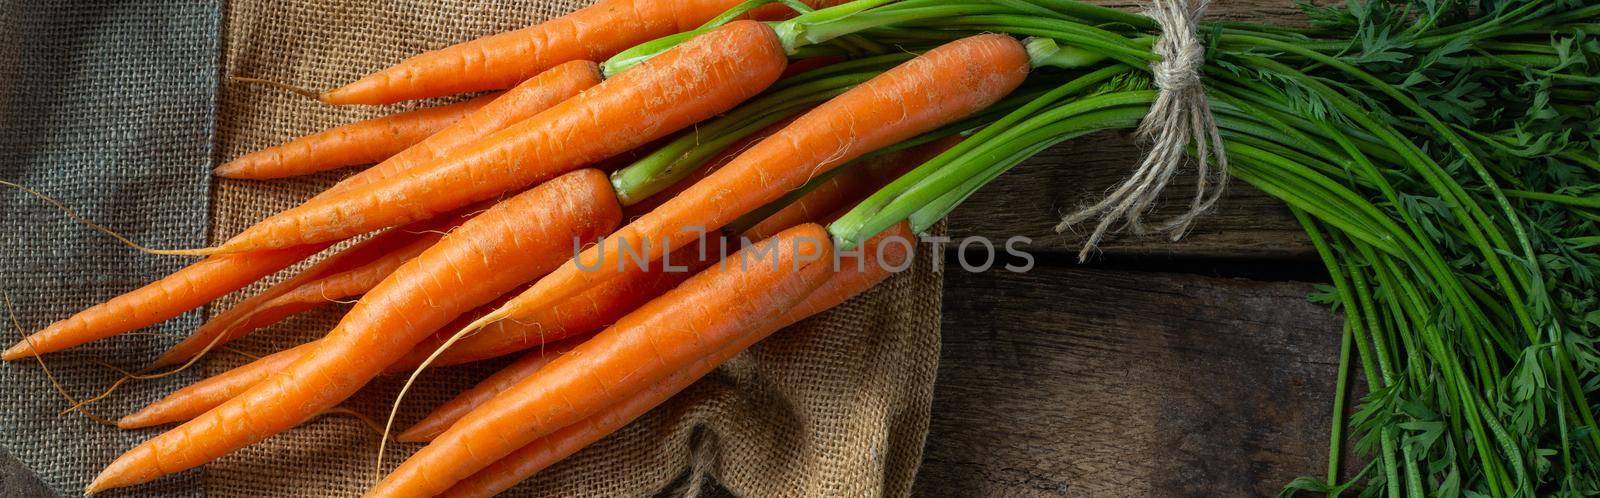 freshly picked vegetables carrots. Bunch of fresh carrots on canvas bag on old wood background. Rustic kitchen, horizontal flat lay